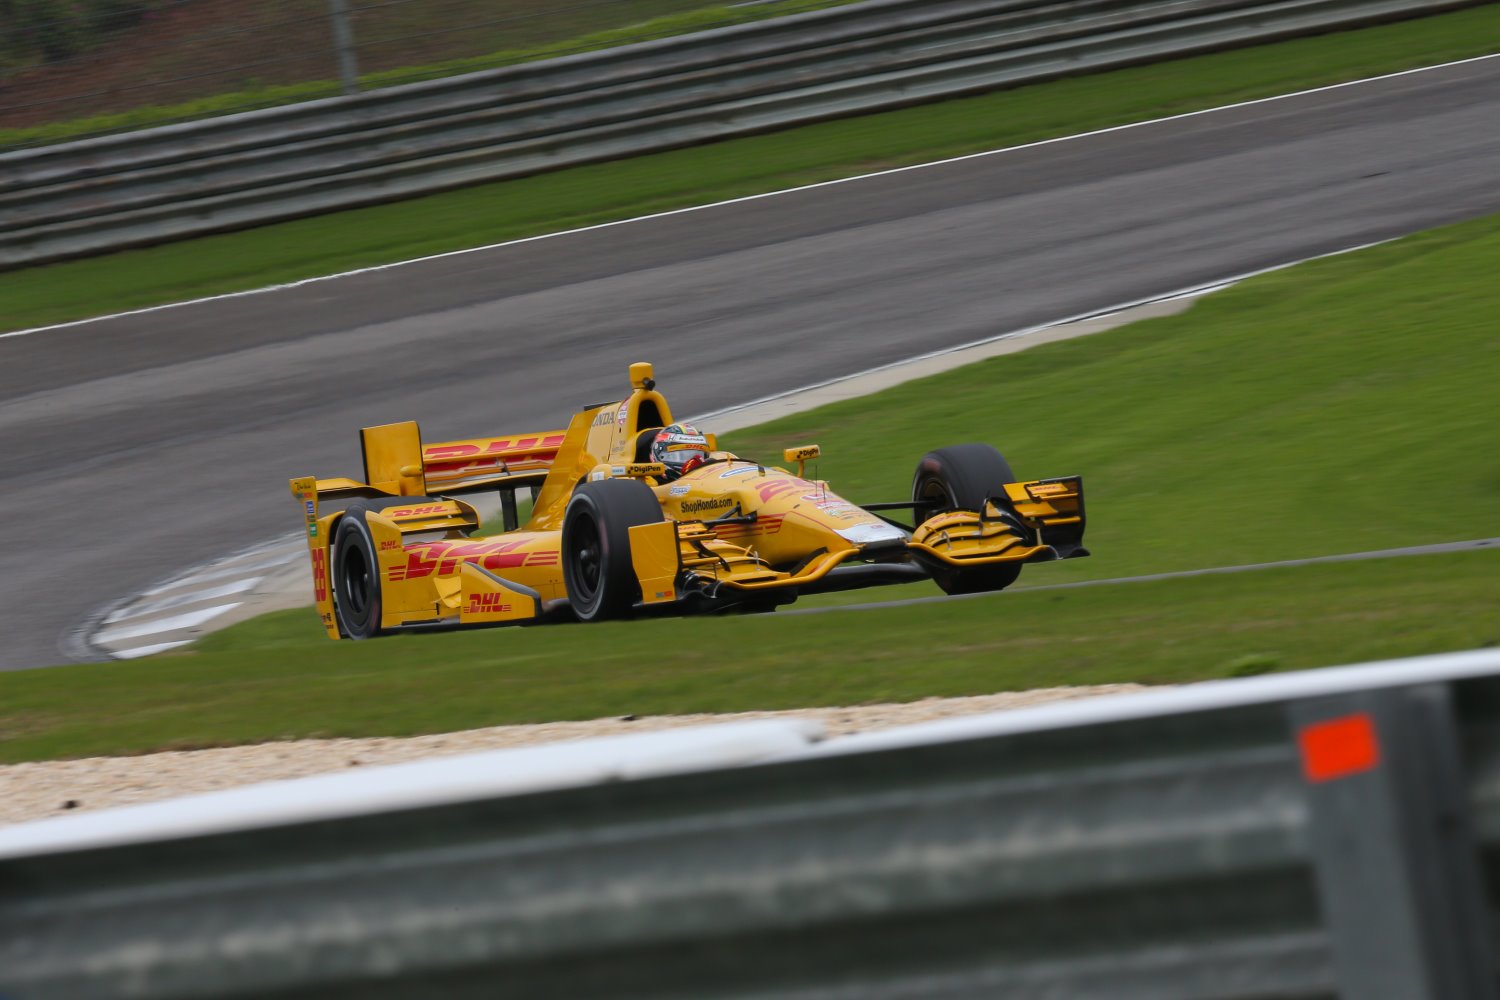 Hunter-Reay had the fastest race lap in his yellow Honda